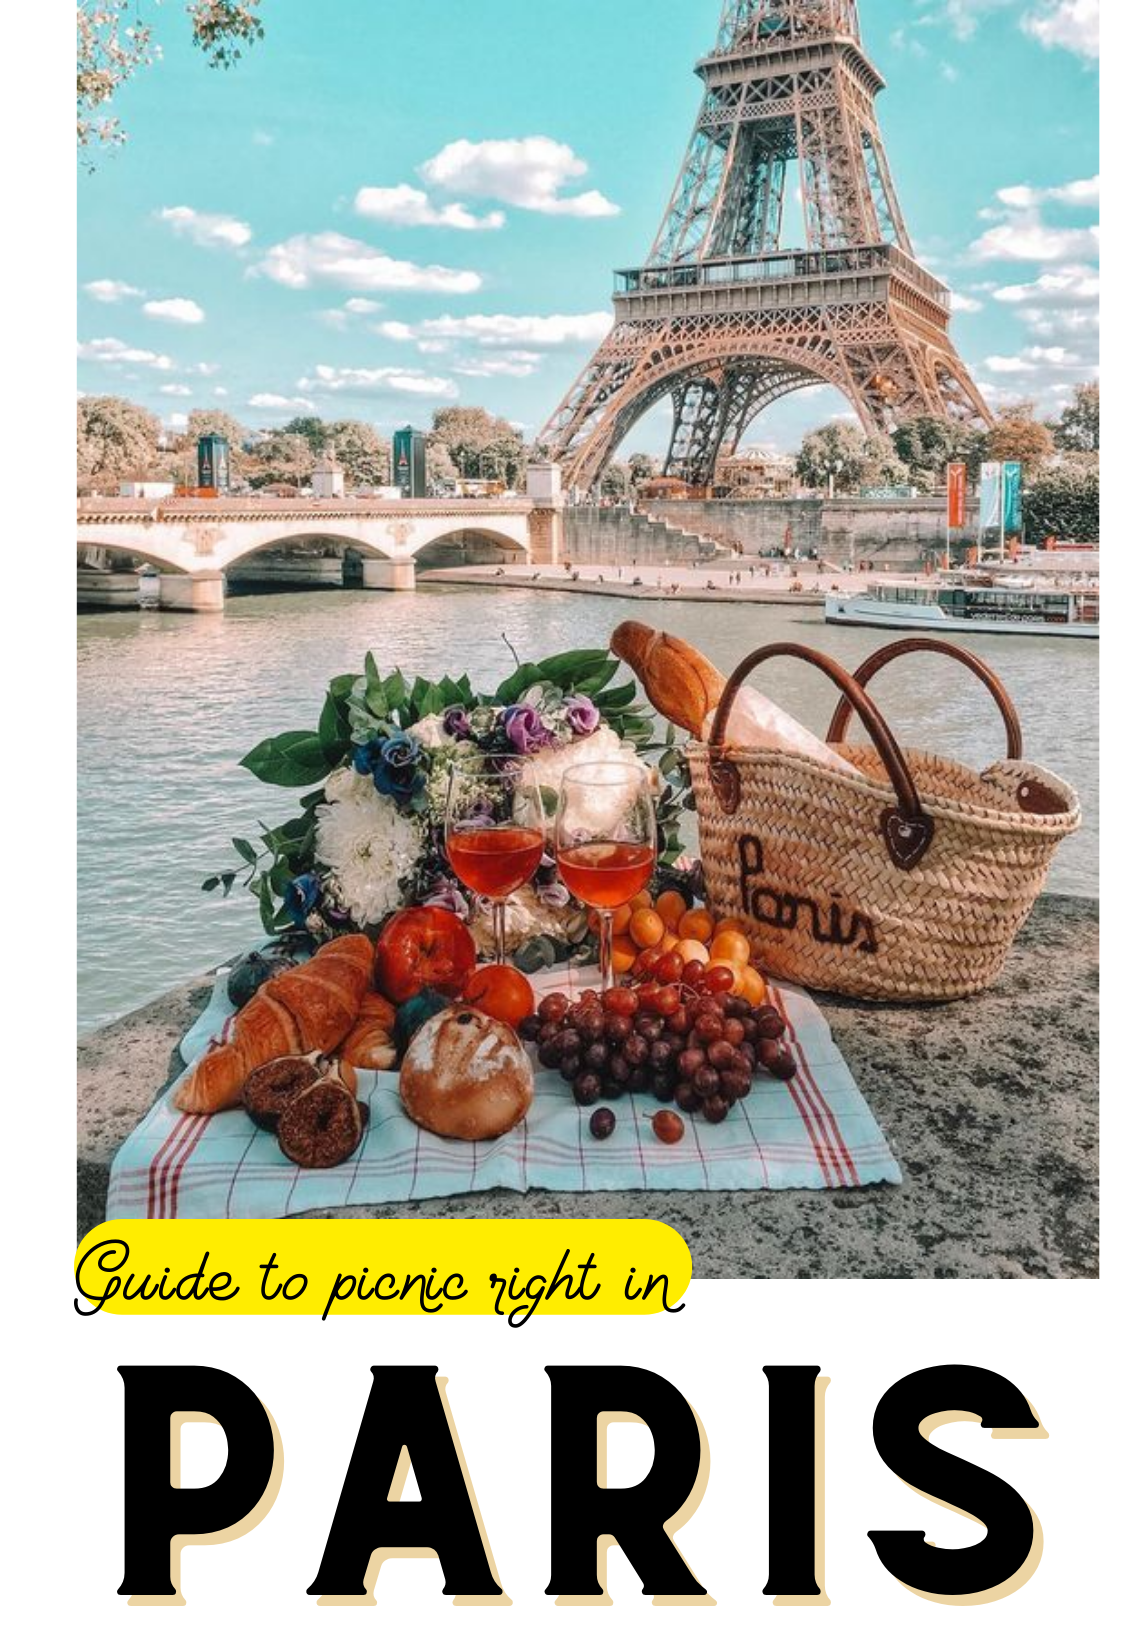 Guide to picnic in Paris